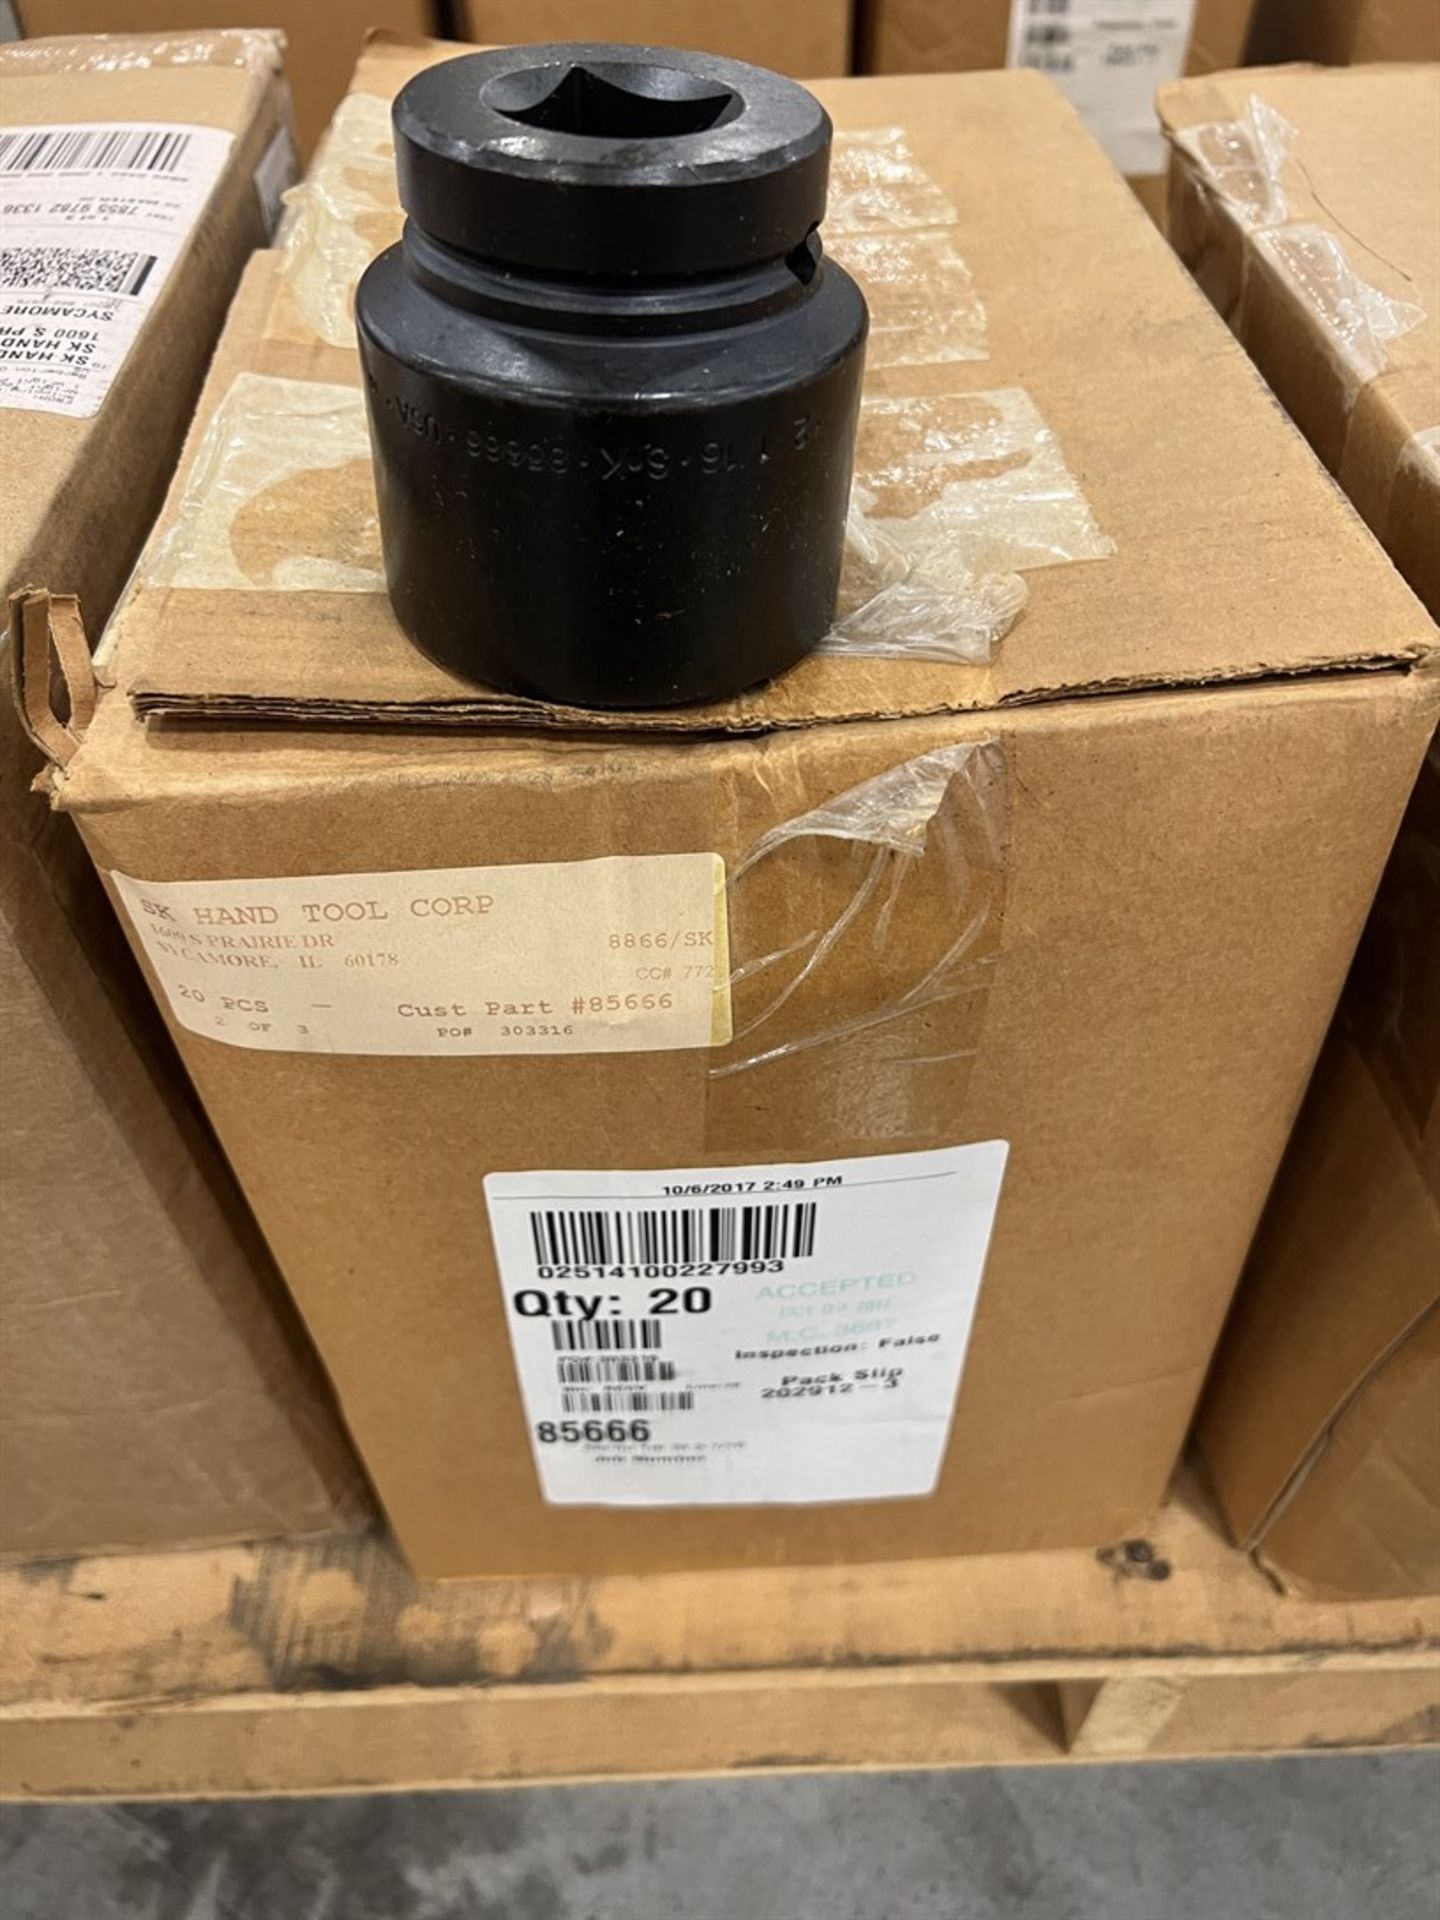 Pallet of 1" Drive Impact Sockets from 1-1/4" to 2-15/16" - Image 5 of 6